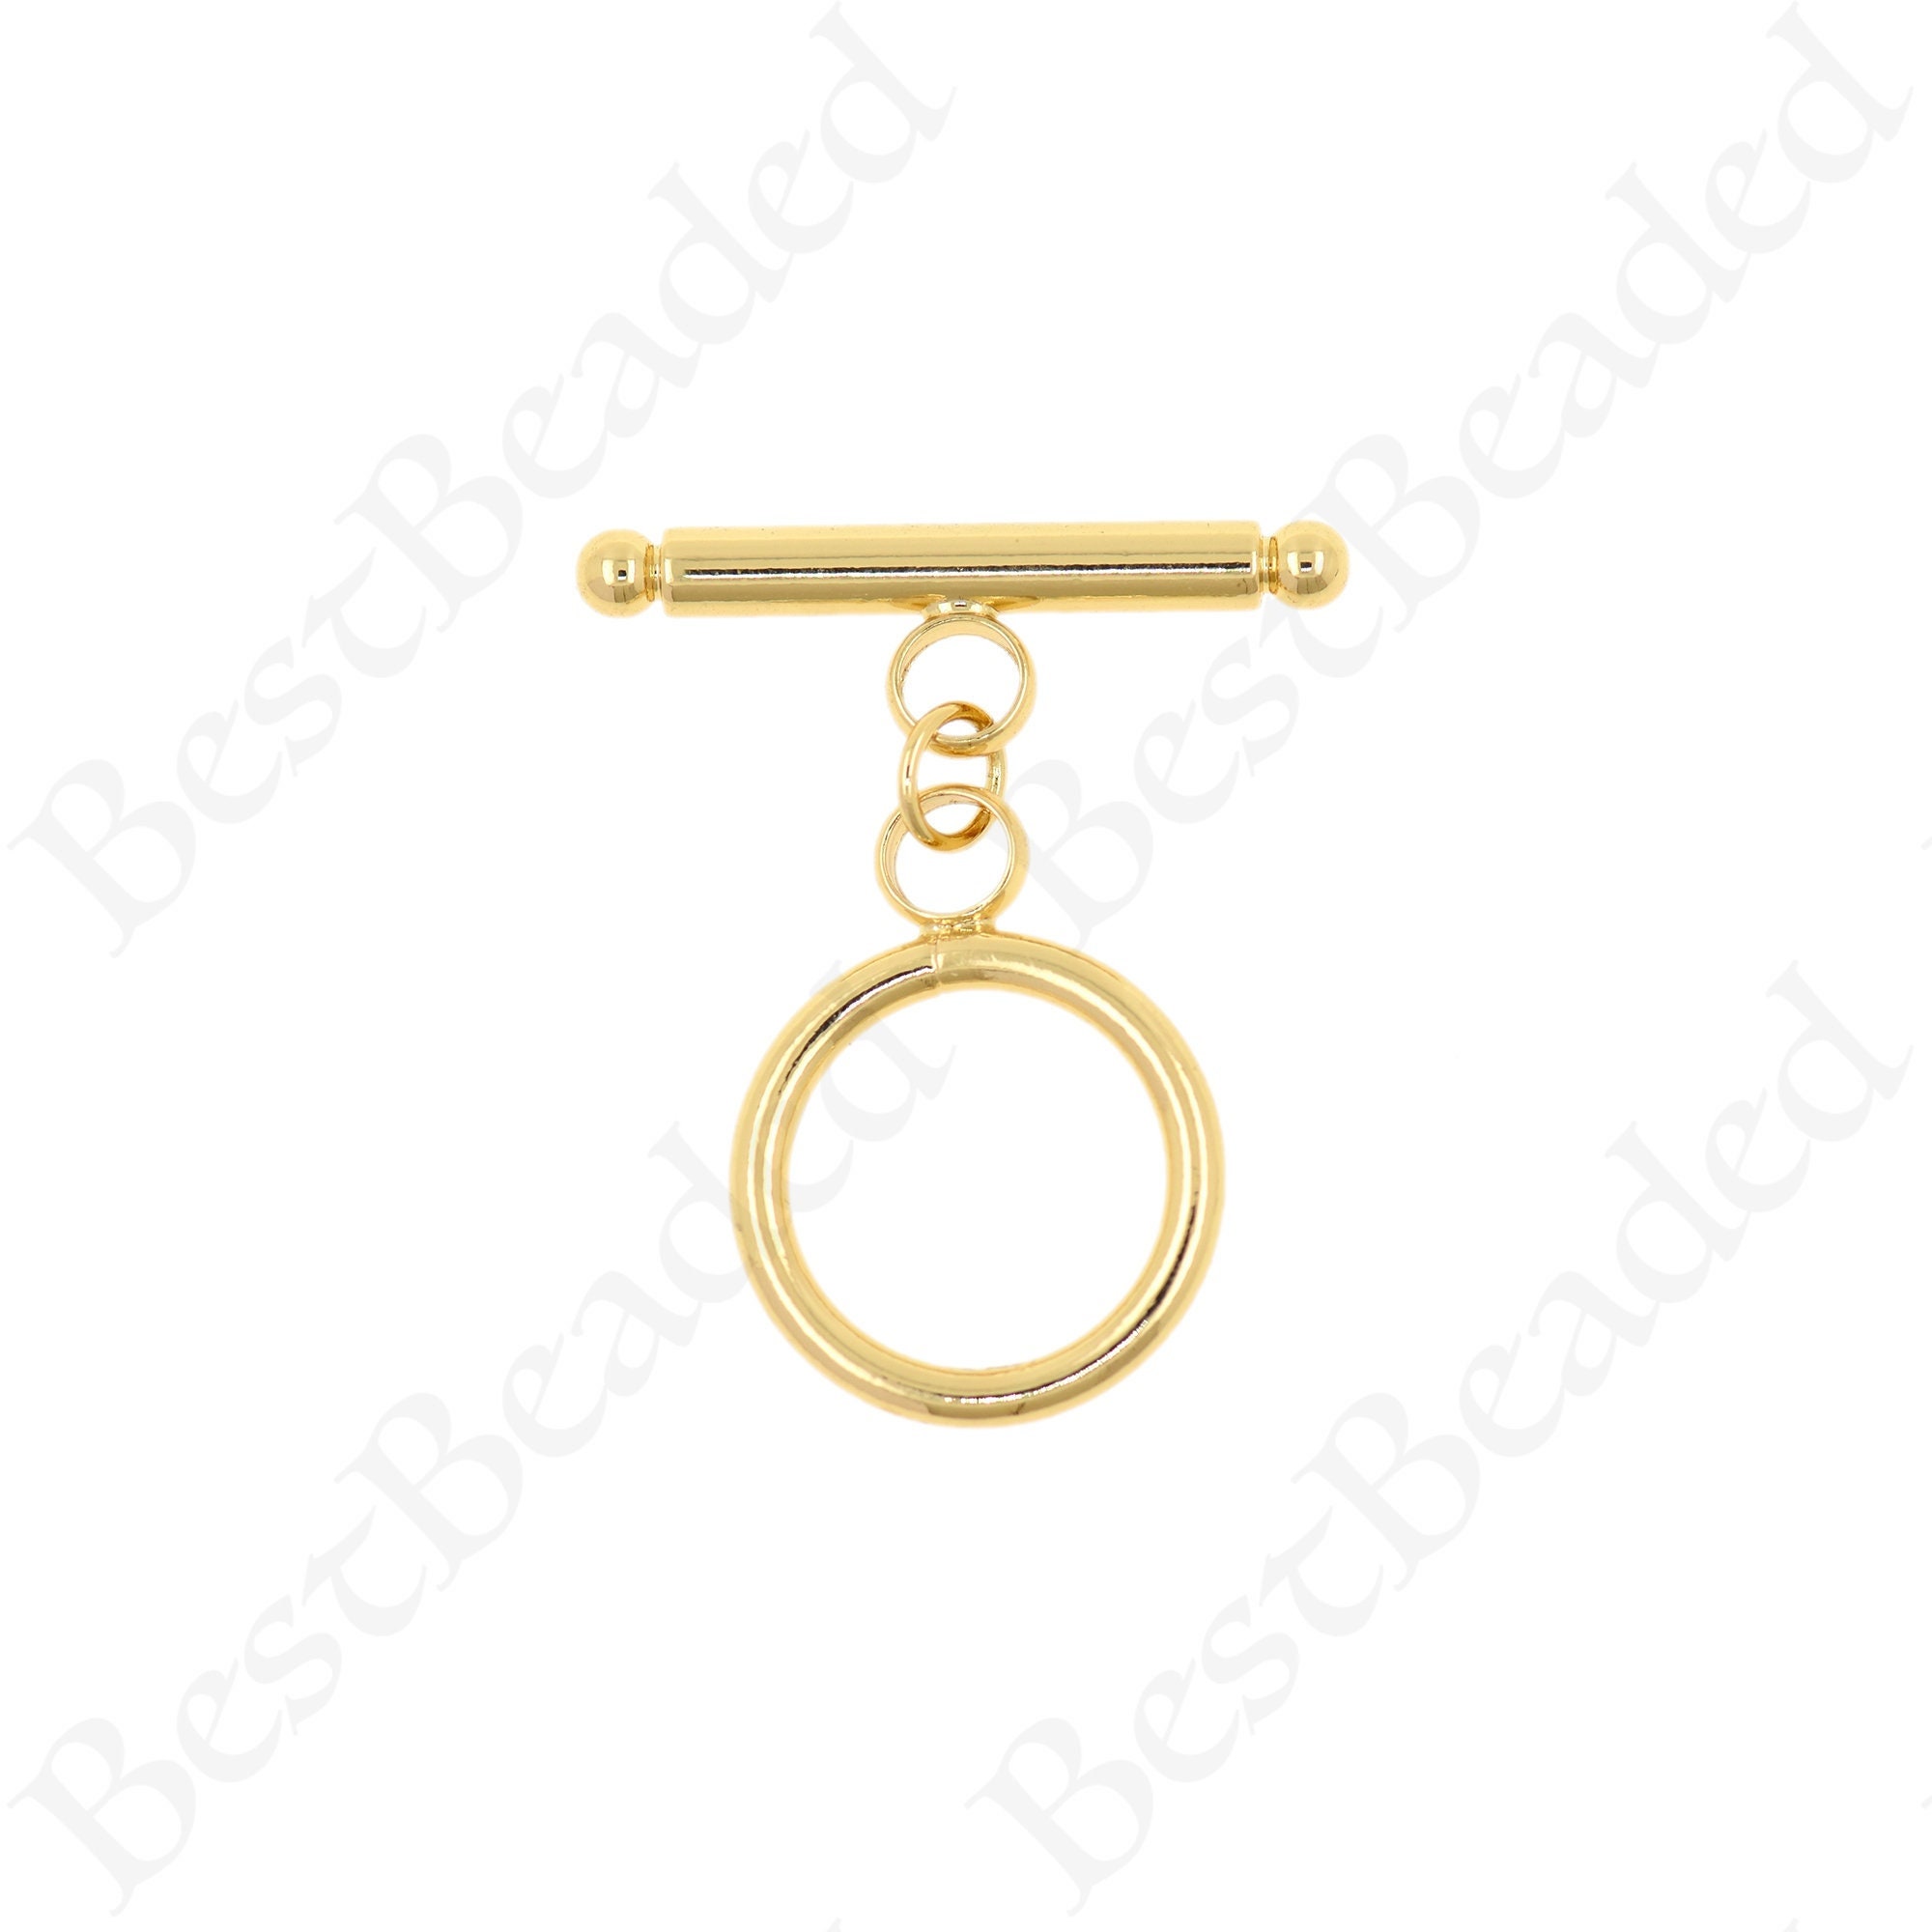 10 Pairs of Very Small Simple Style Silver Toggle Clasps,toggle Clasps for  Bracelets, Toggle Clasps for Necklaces 